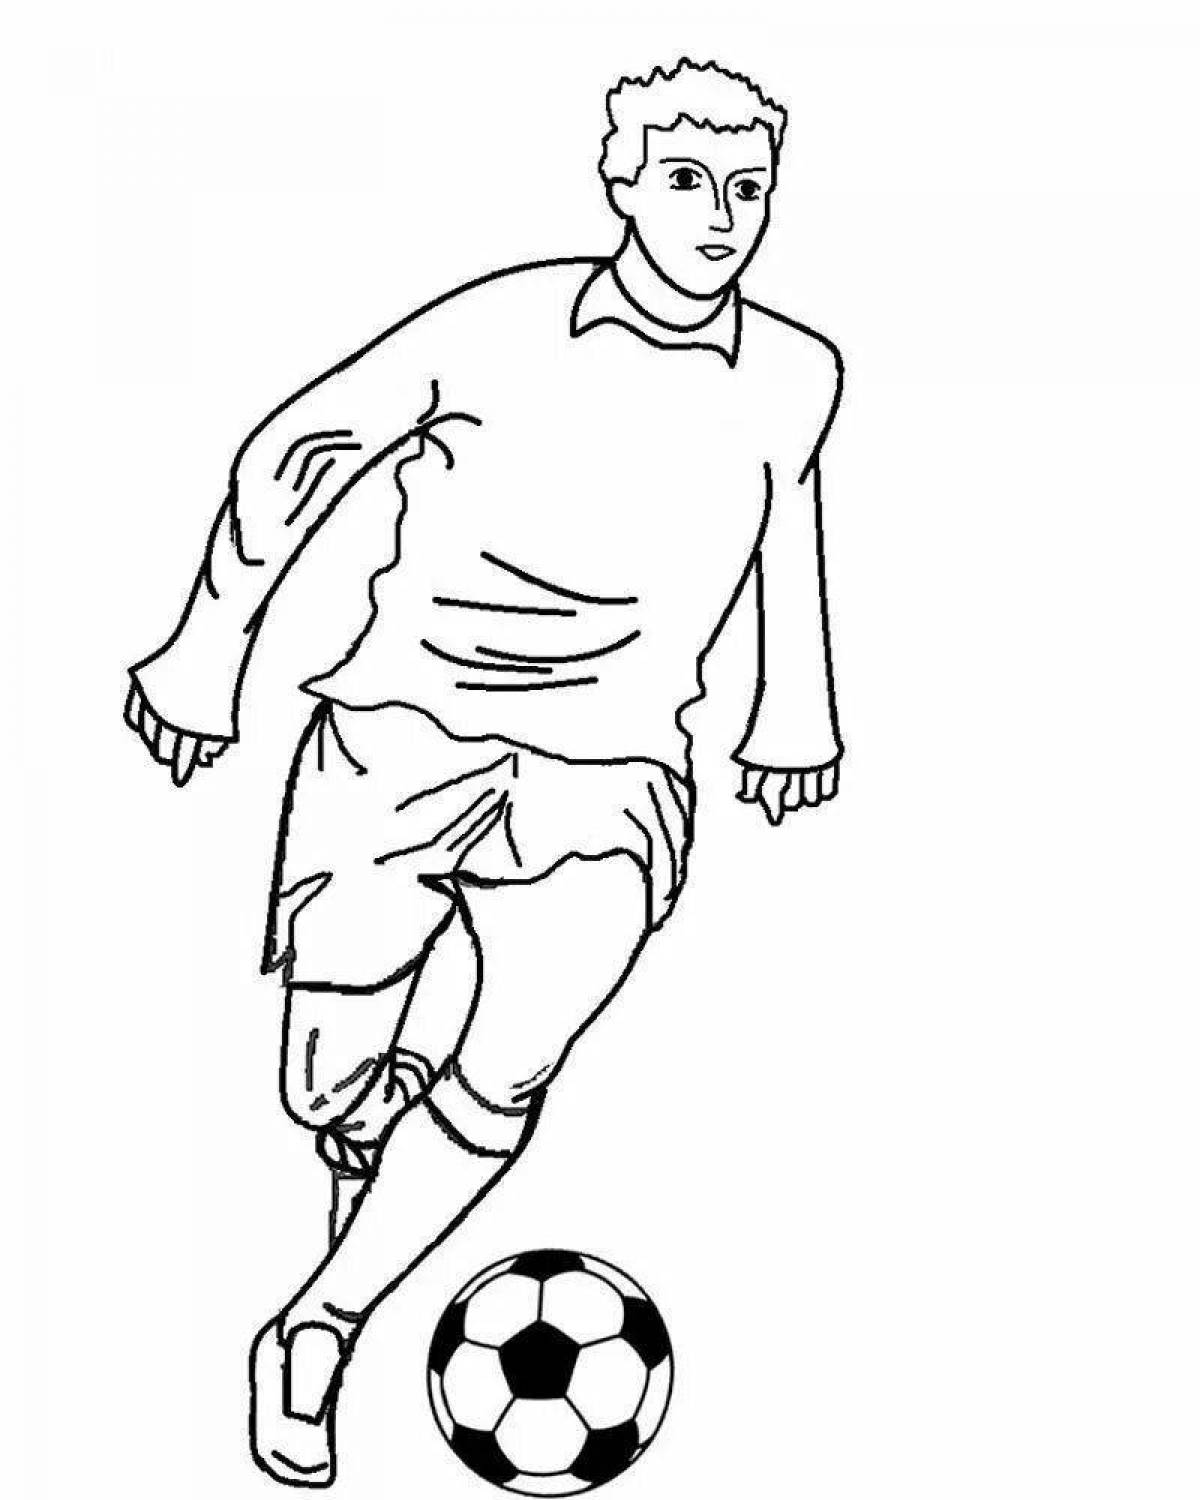 Incredible soccer player coloring book for kids